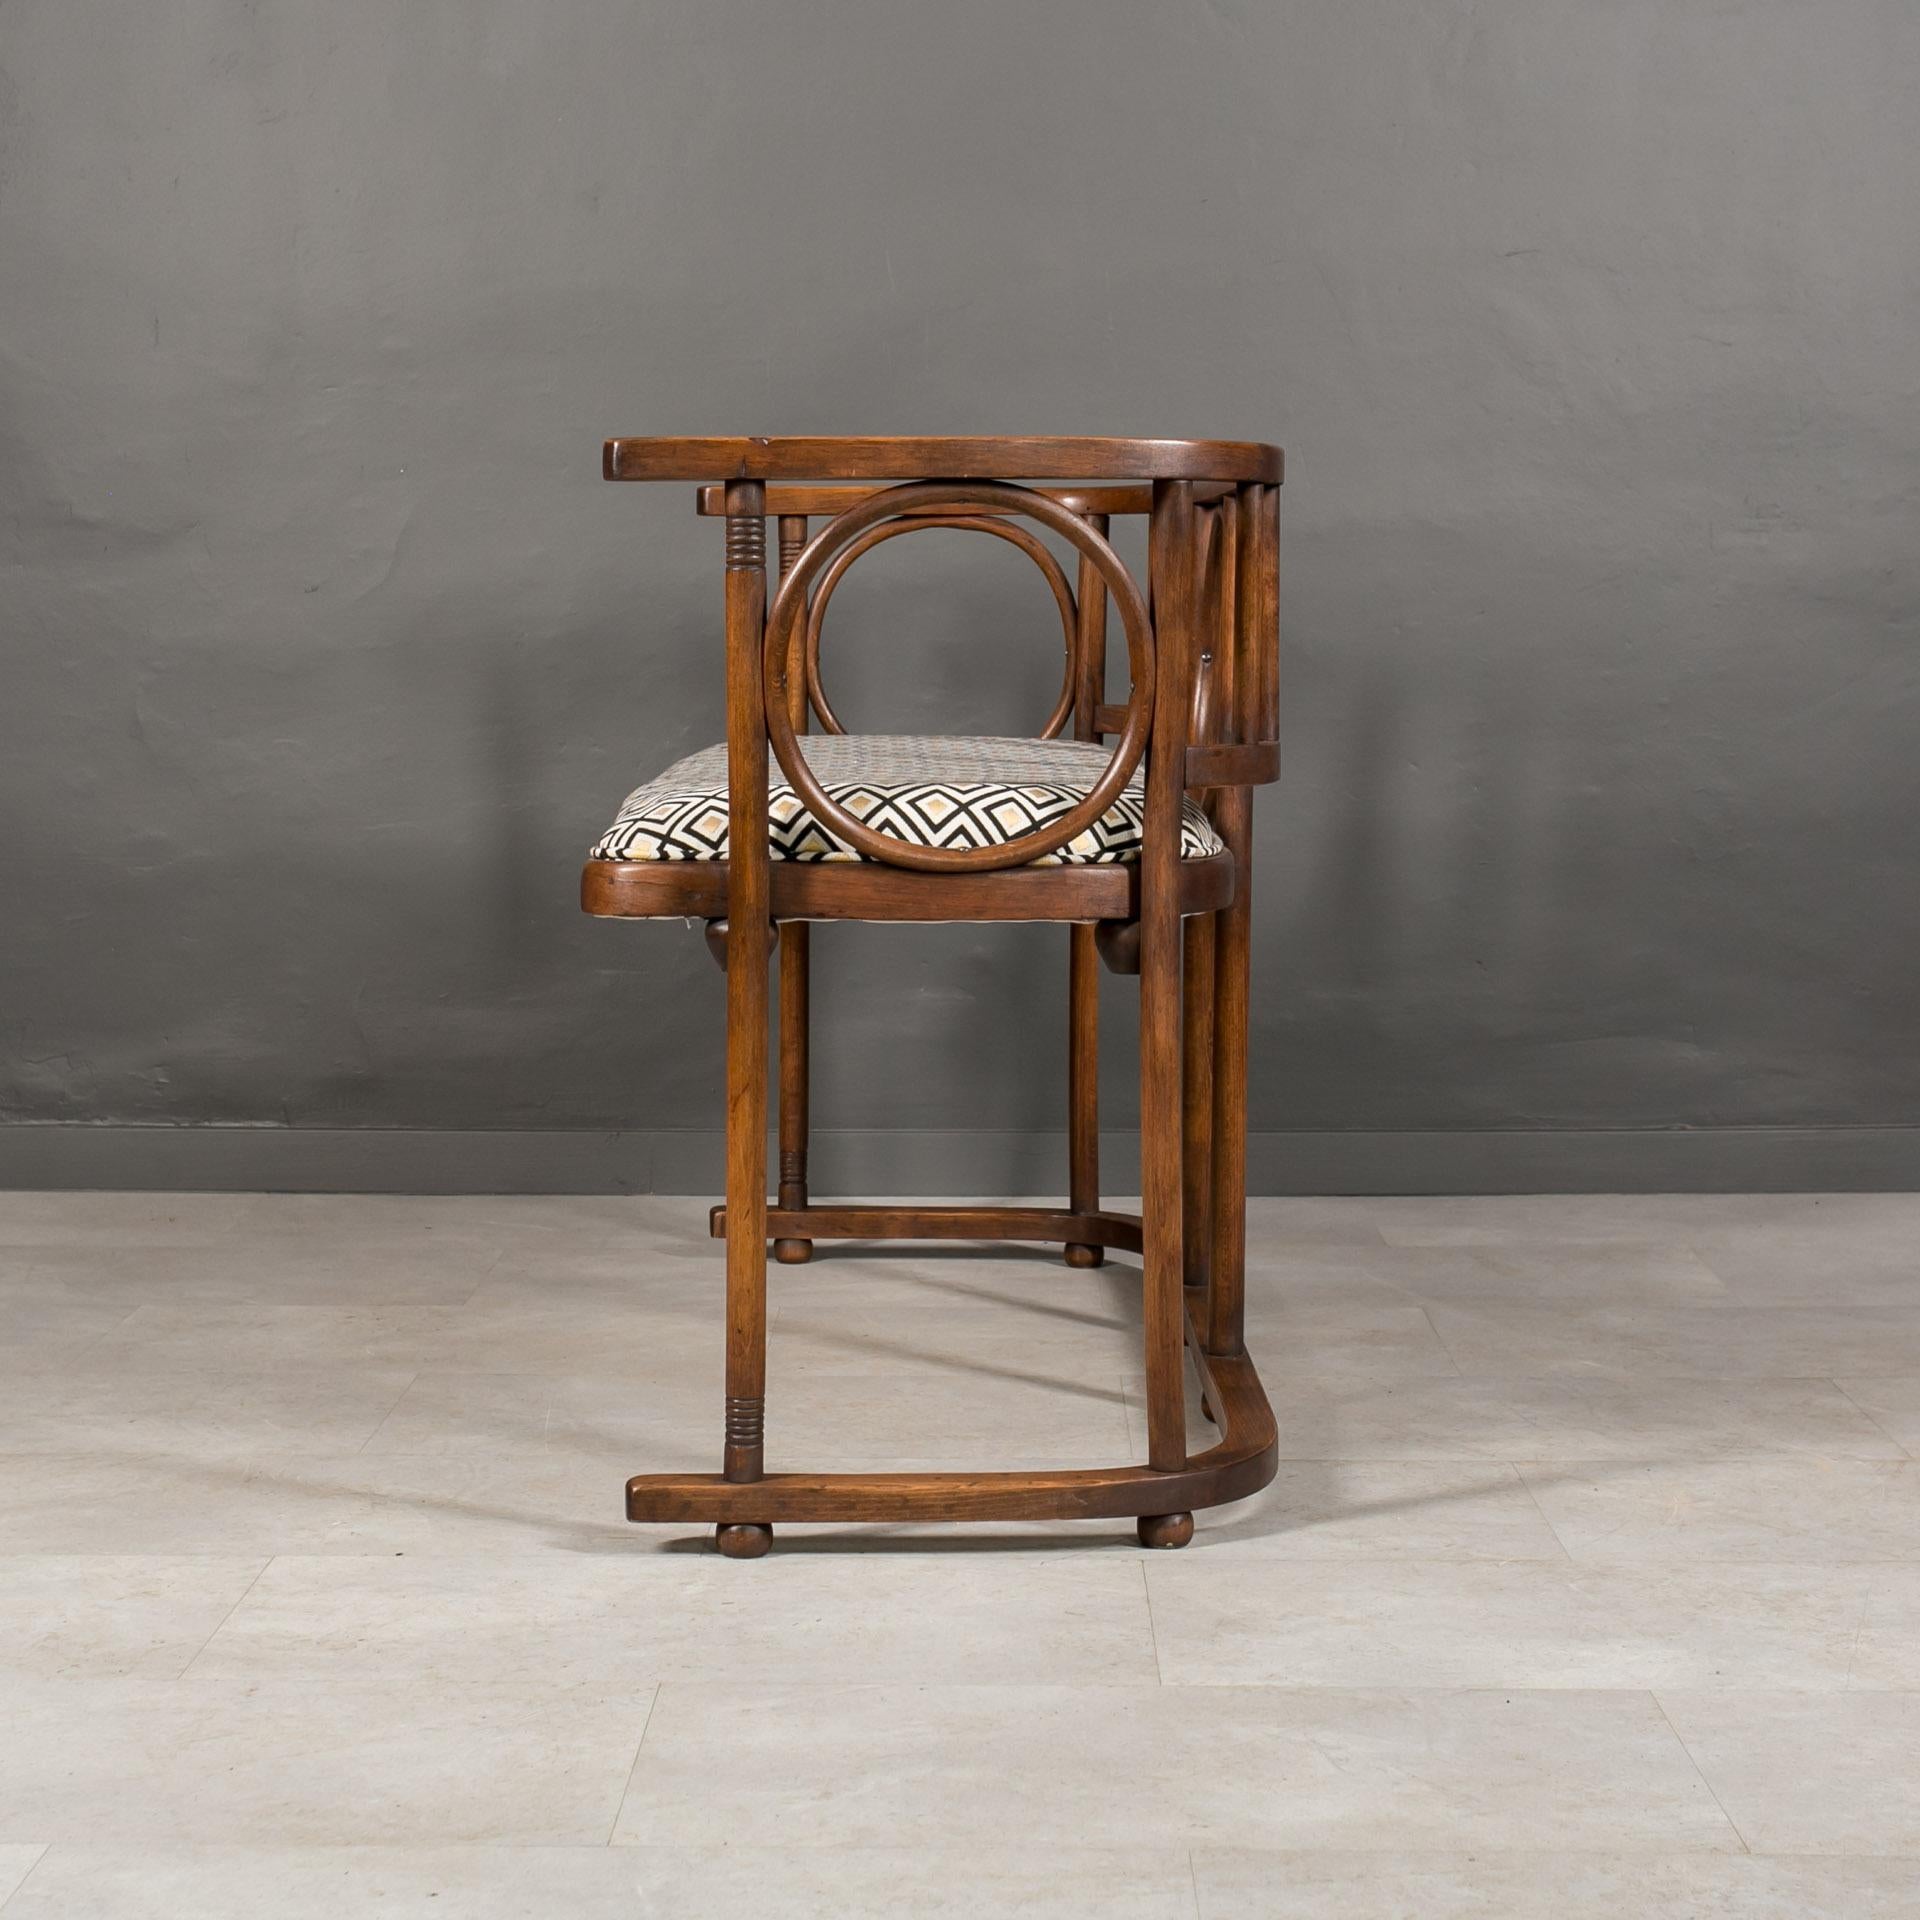 Early 20th Century Bentwood Bench Settee by J. Hoffmann for Thonet - Mundus 1